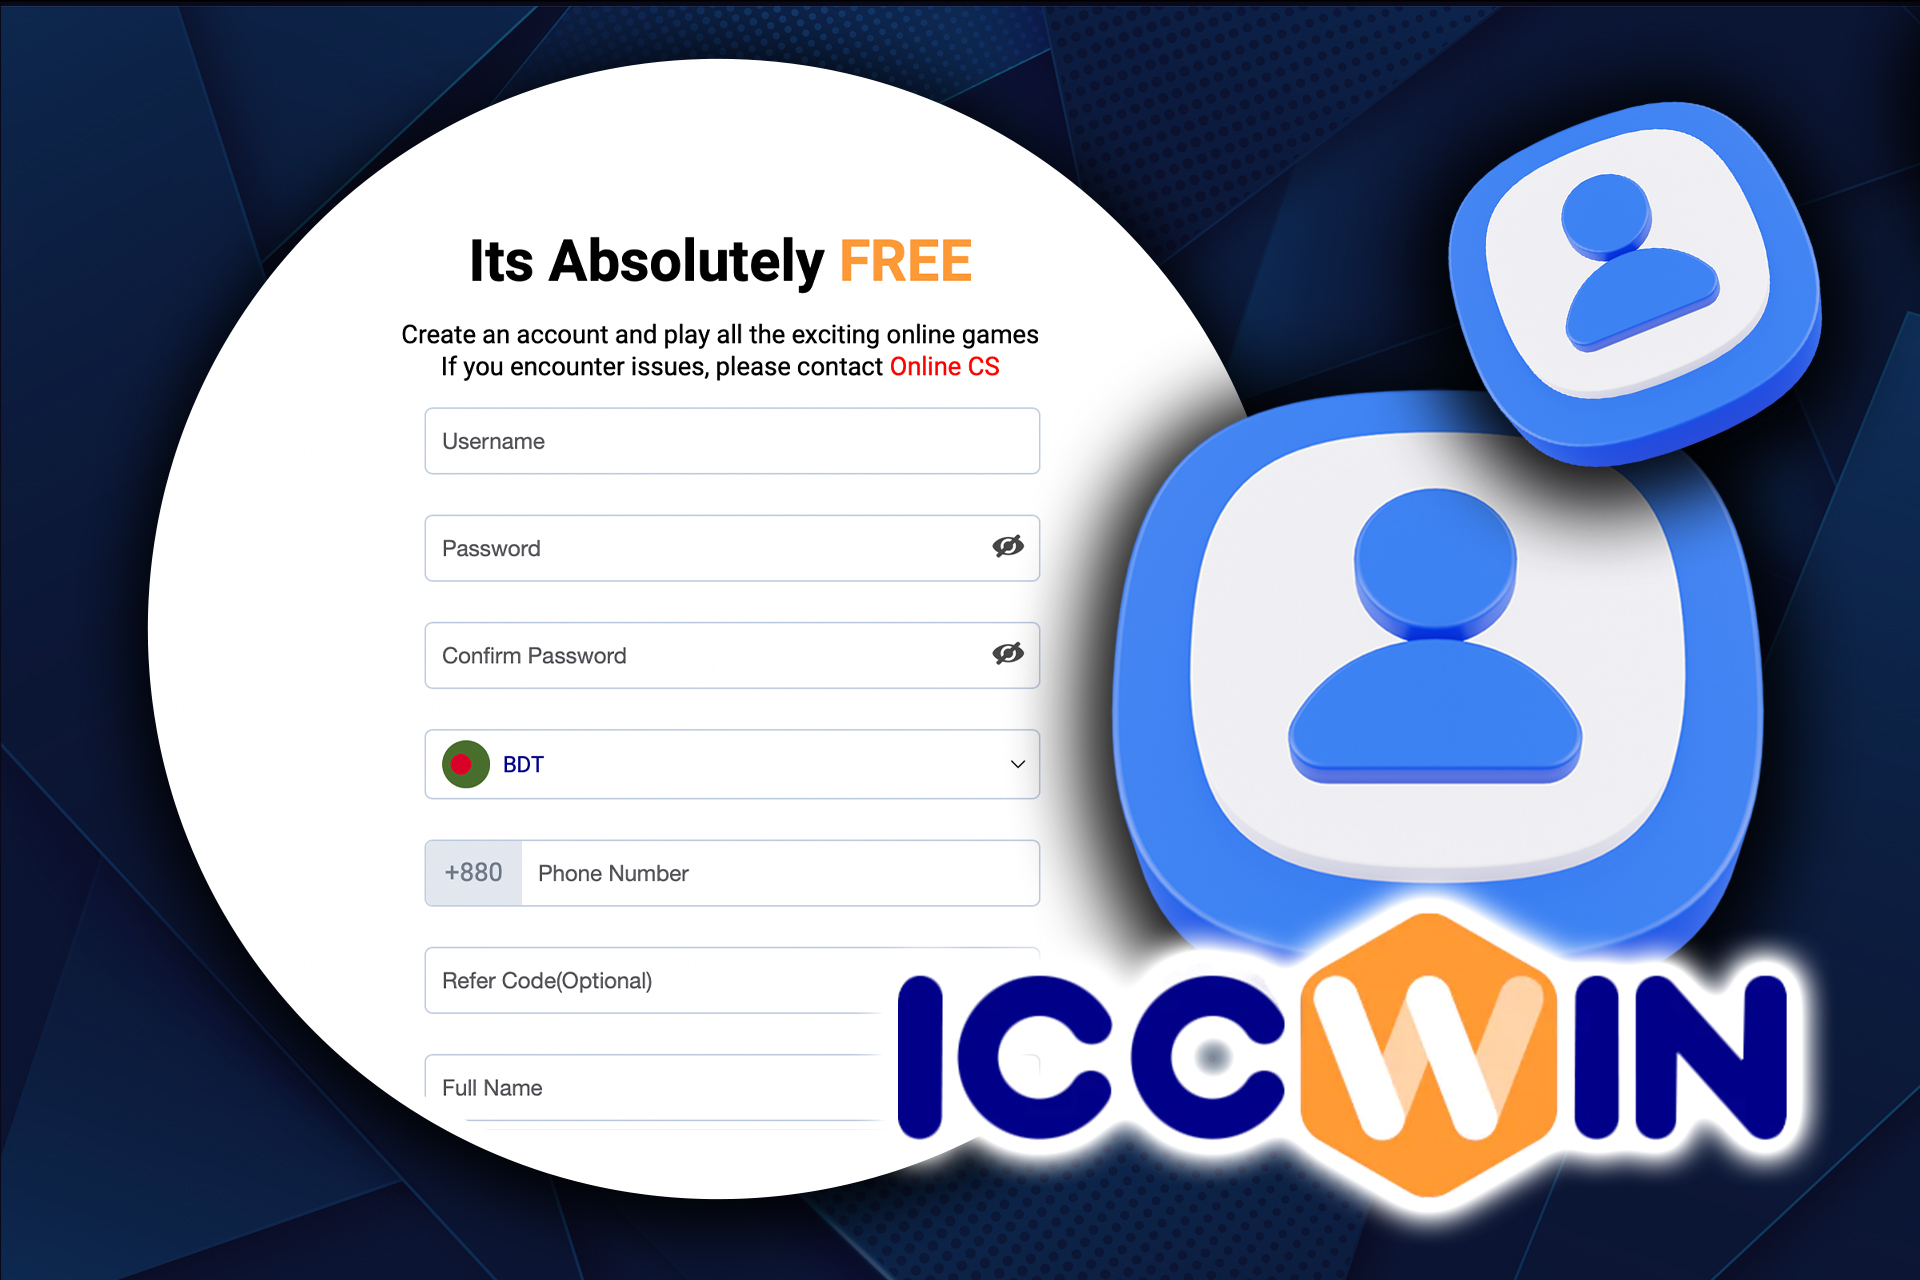 Go to the ICCWIN website and create an account.